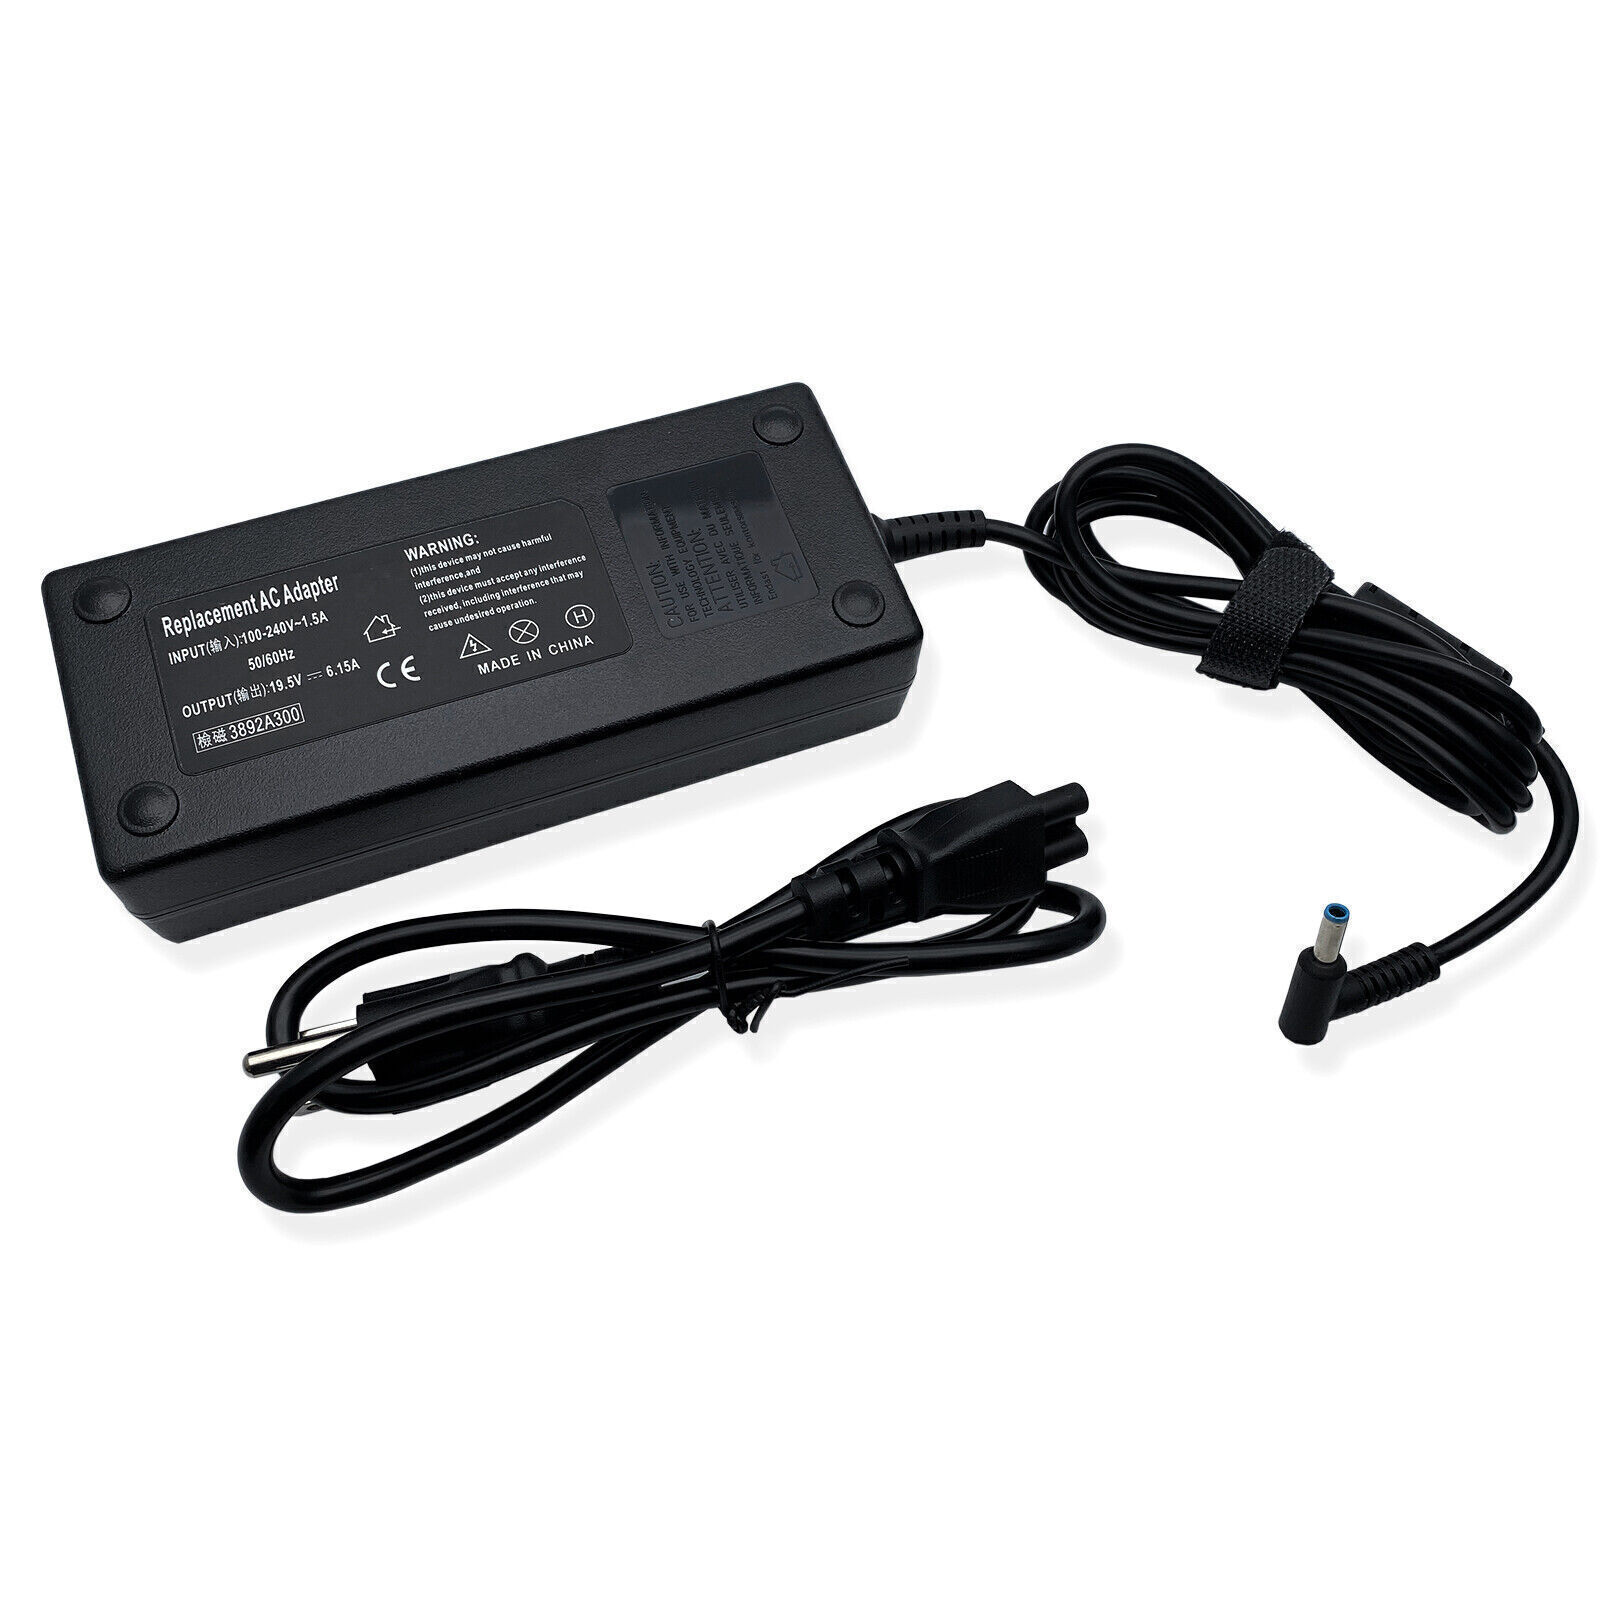 120W AC Adapter for HP UNIVERSAL USB-C G2 G5 DOCK STATION HSN-IX02 Power Cord